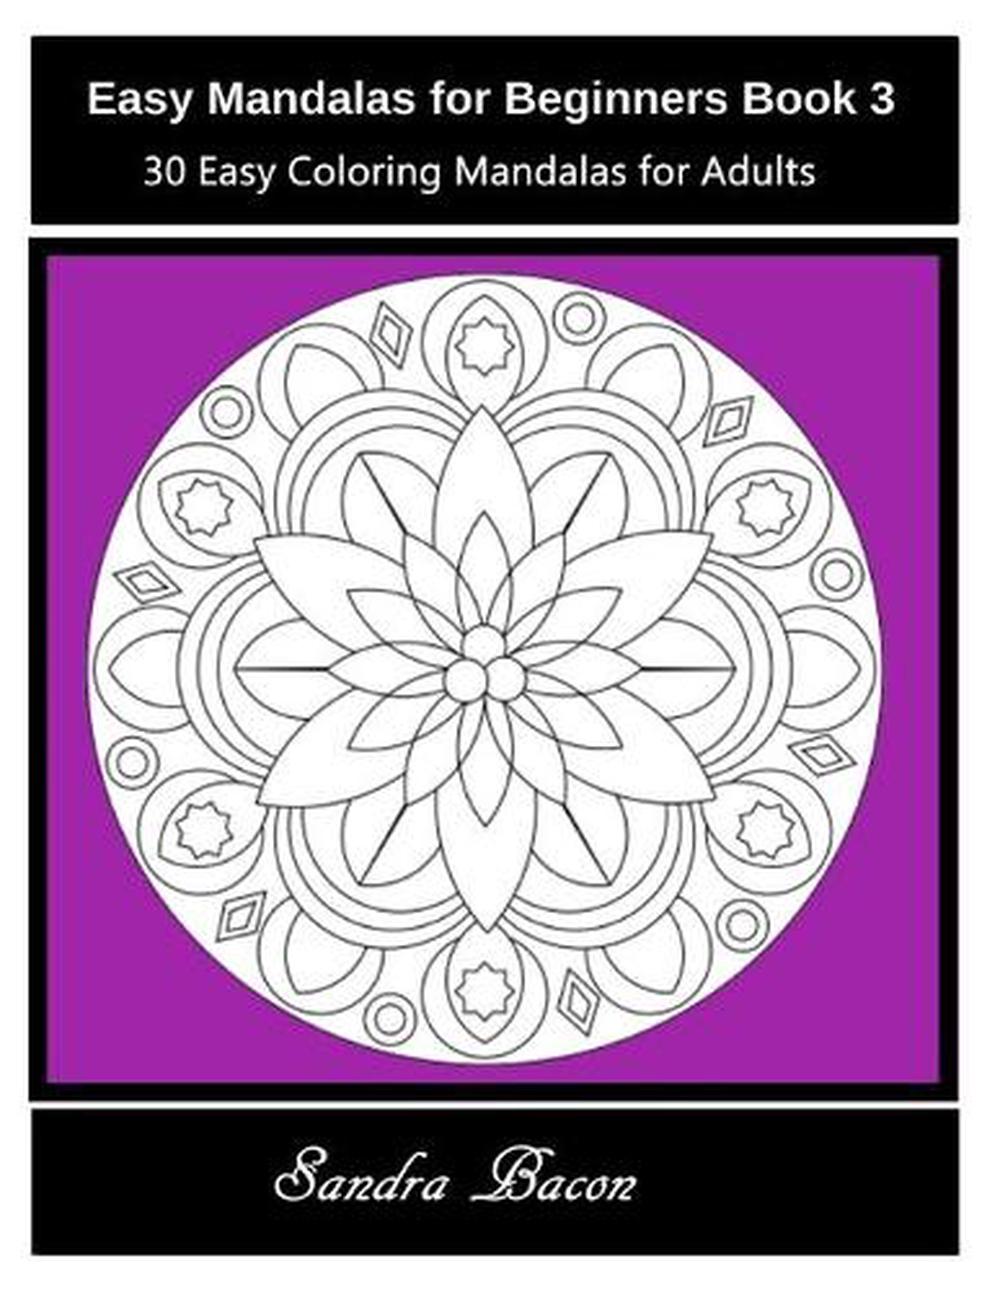 Download Easy Mandalas for Beginners Book 3: 30 Easy Coloring Mandalas for Adults by Sand 9781530686582 ...